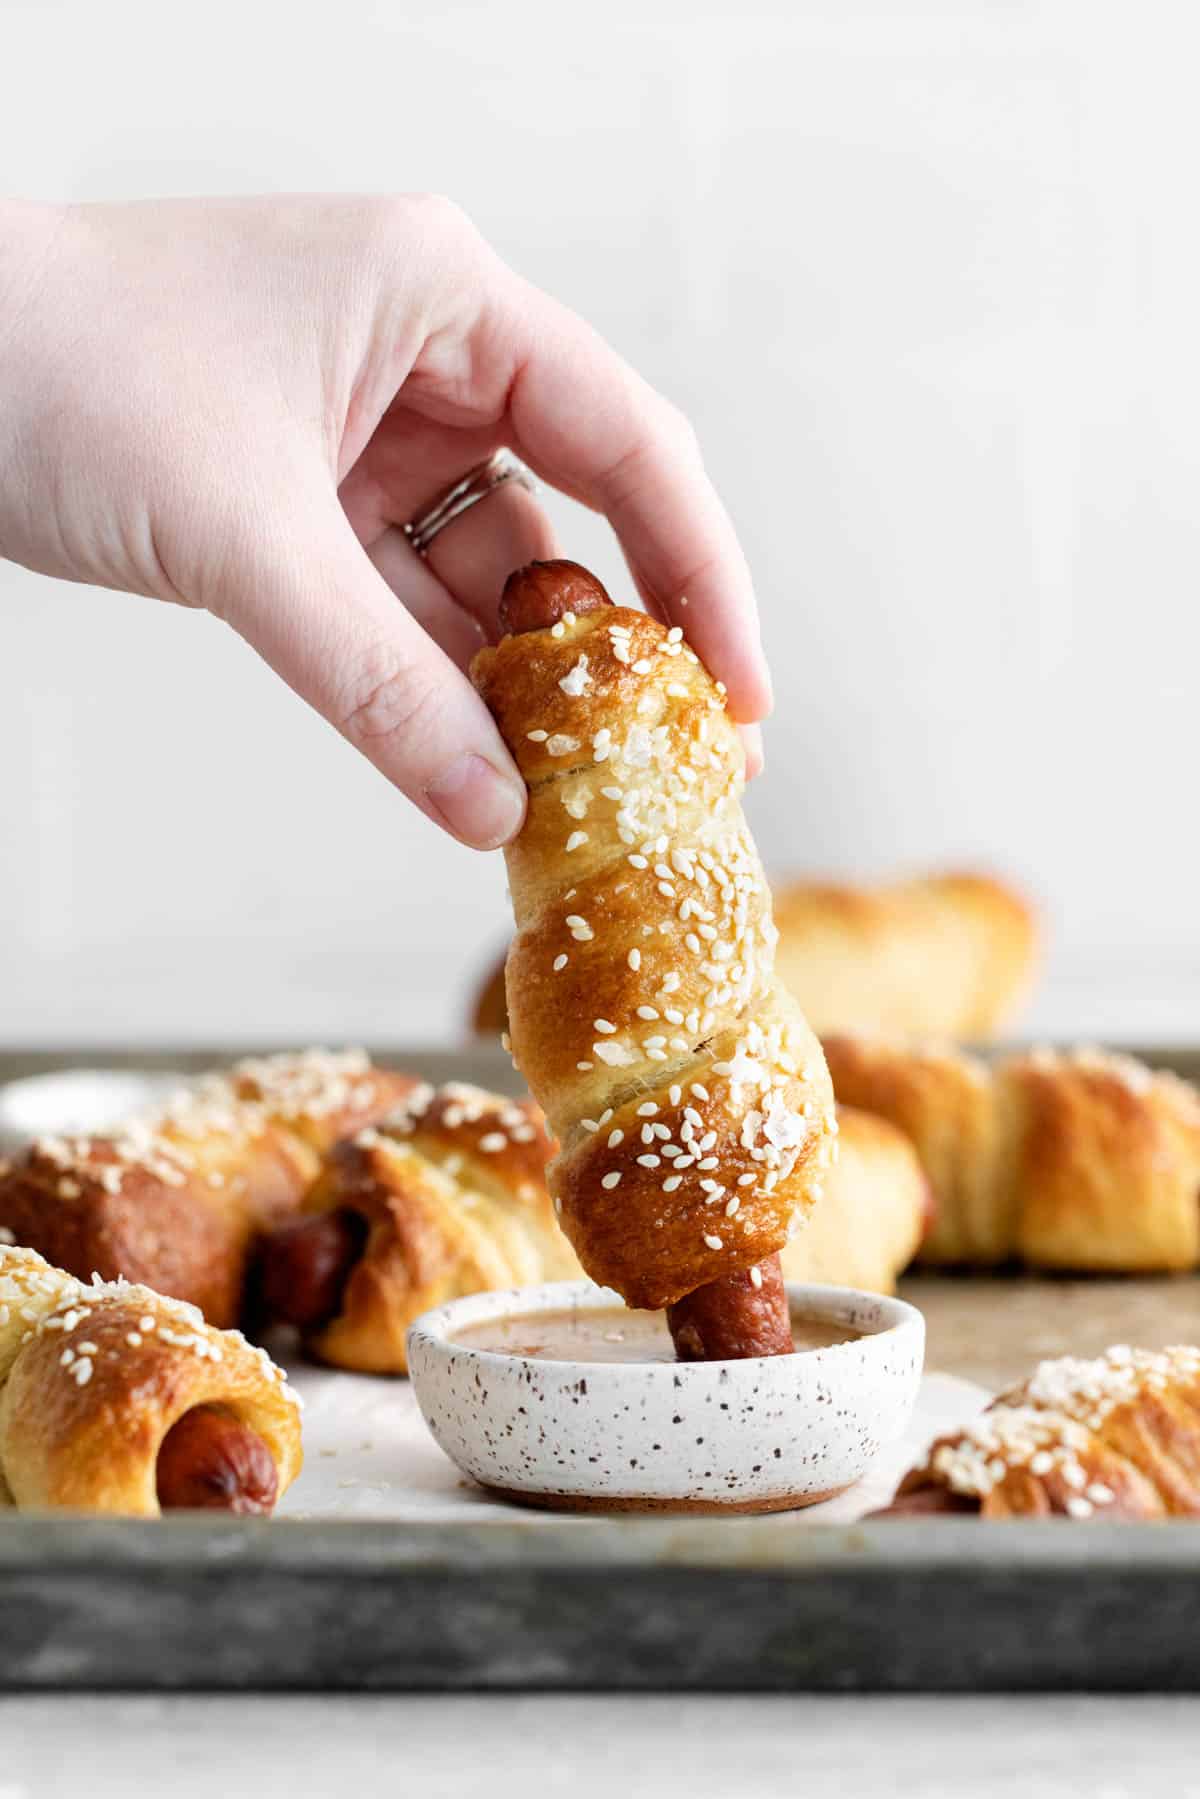 A hand holding a pretzel dog dipping it into a spicy honey mustard sauce.